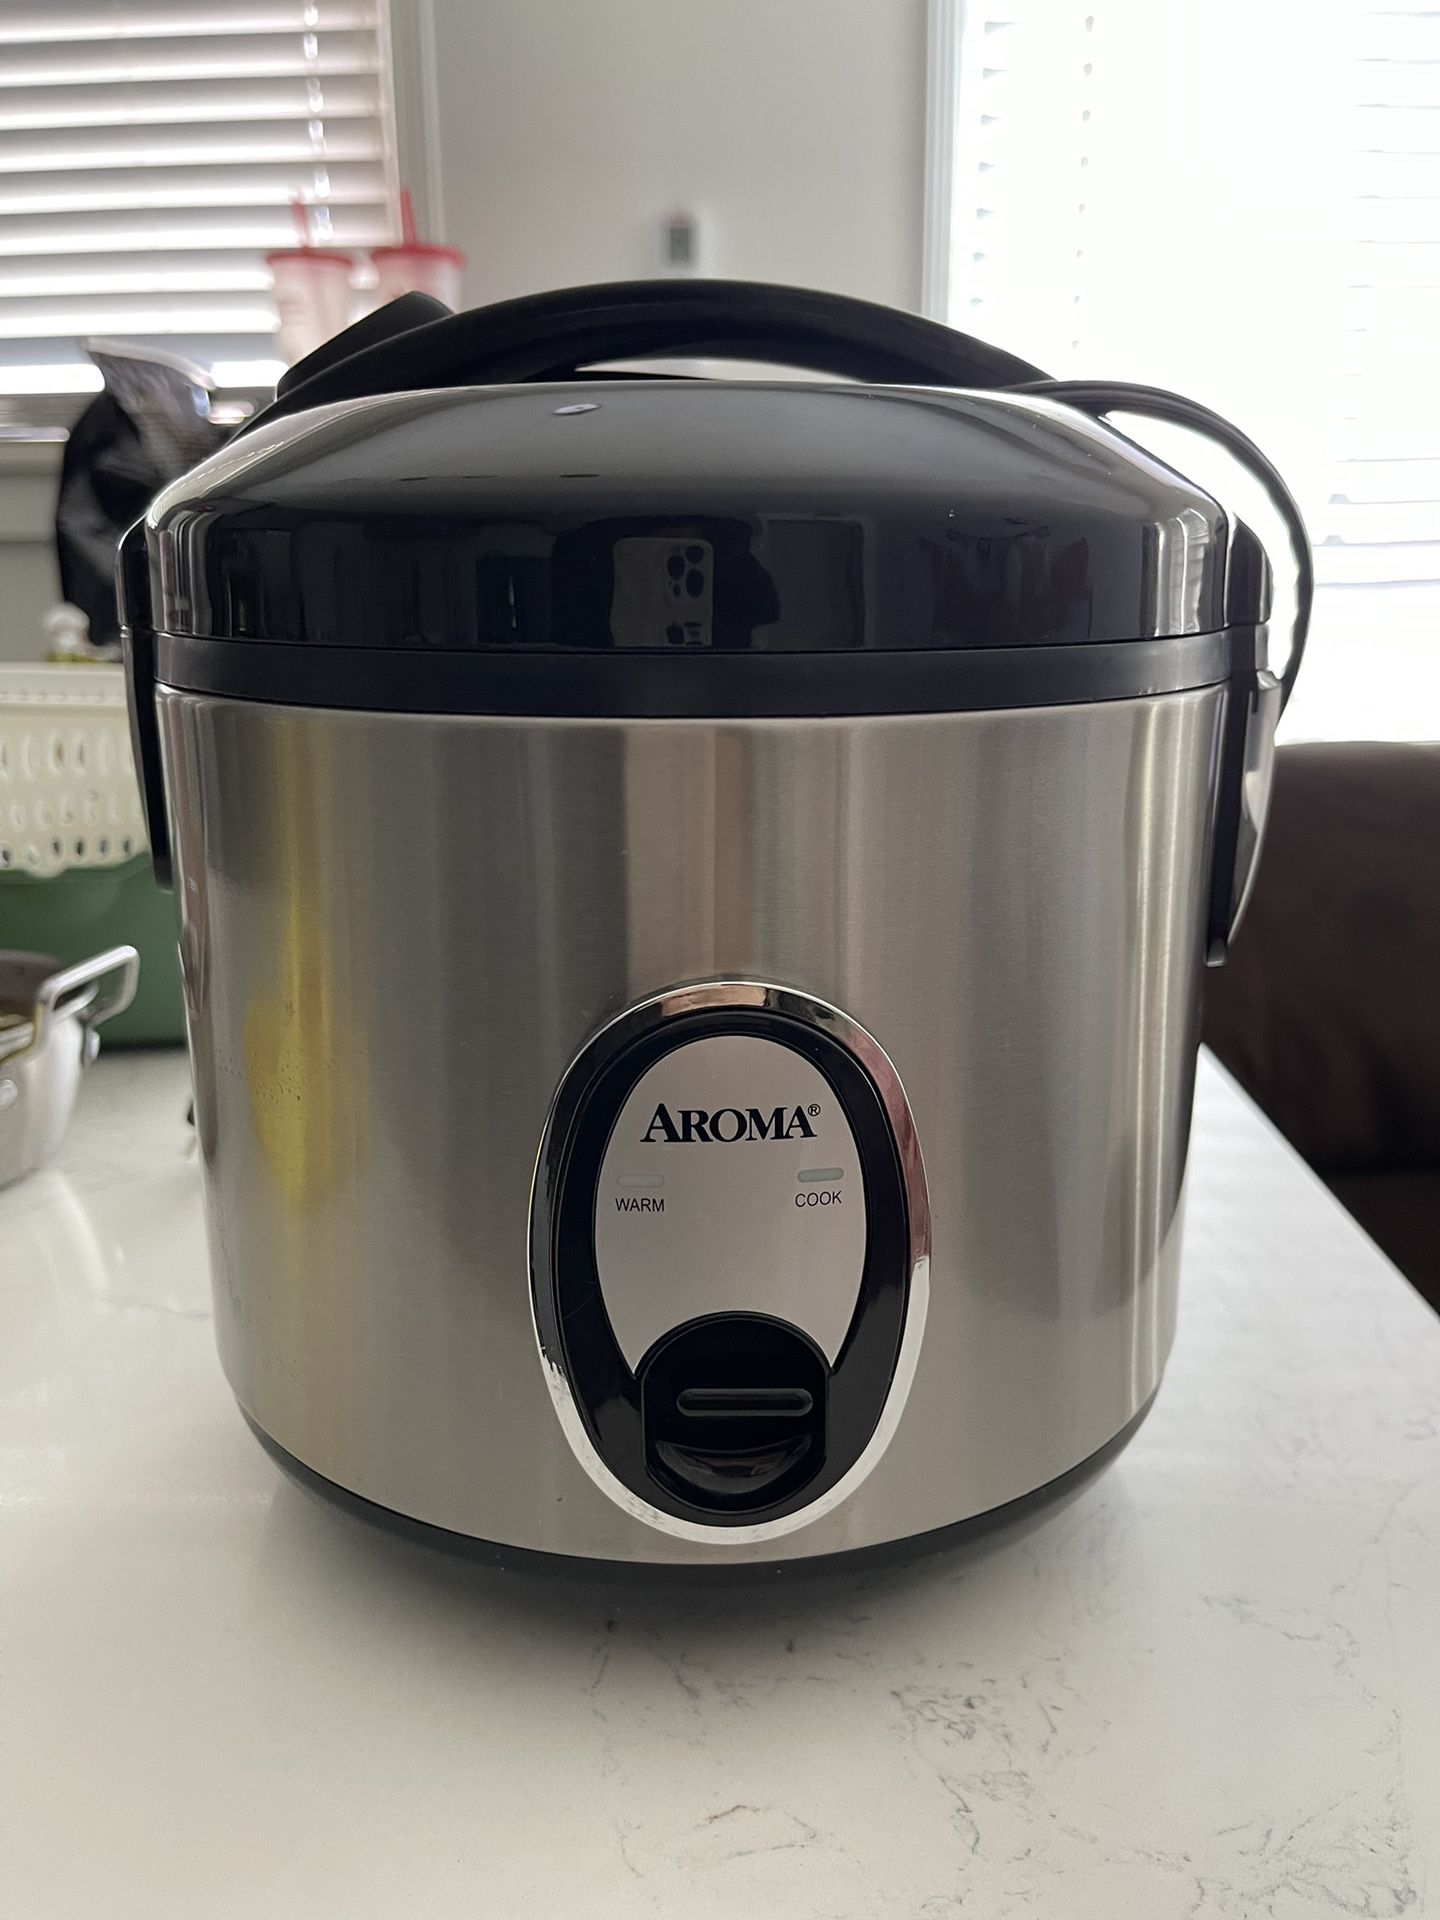 Aroma ARC-914SB 8-Cup (Cooked) Rice Cooker